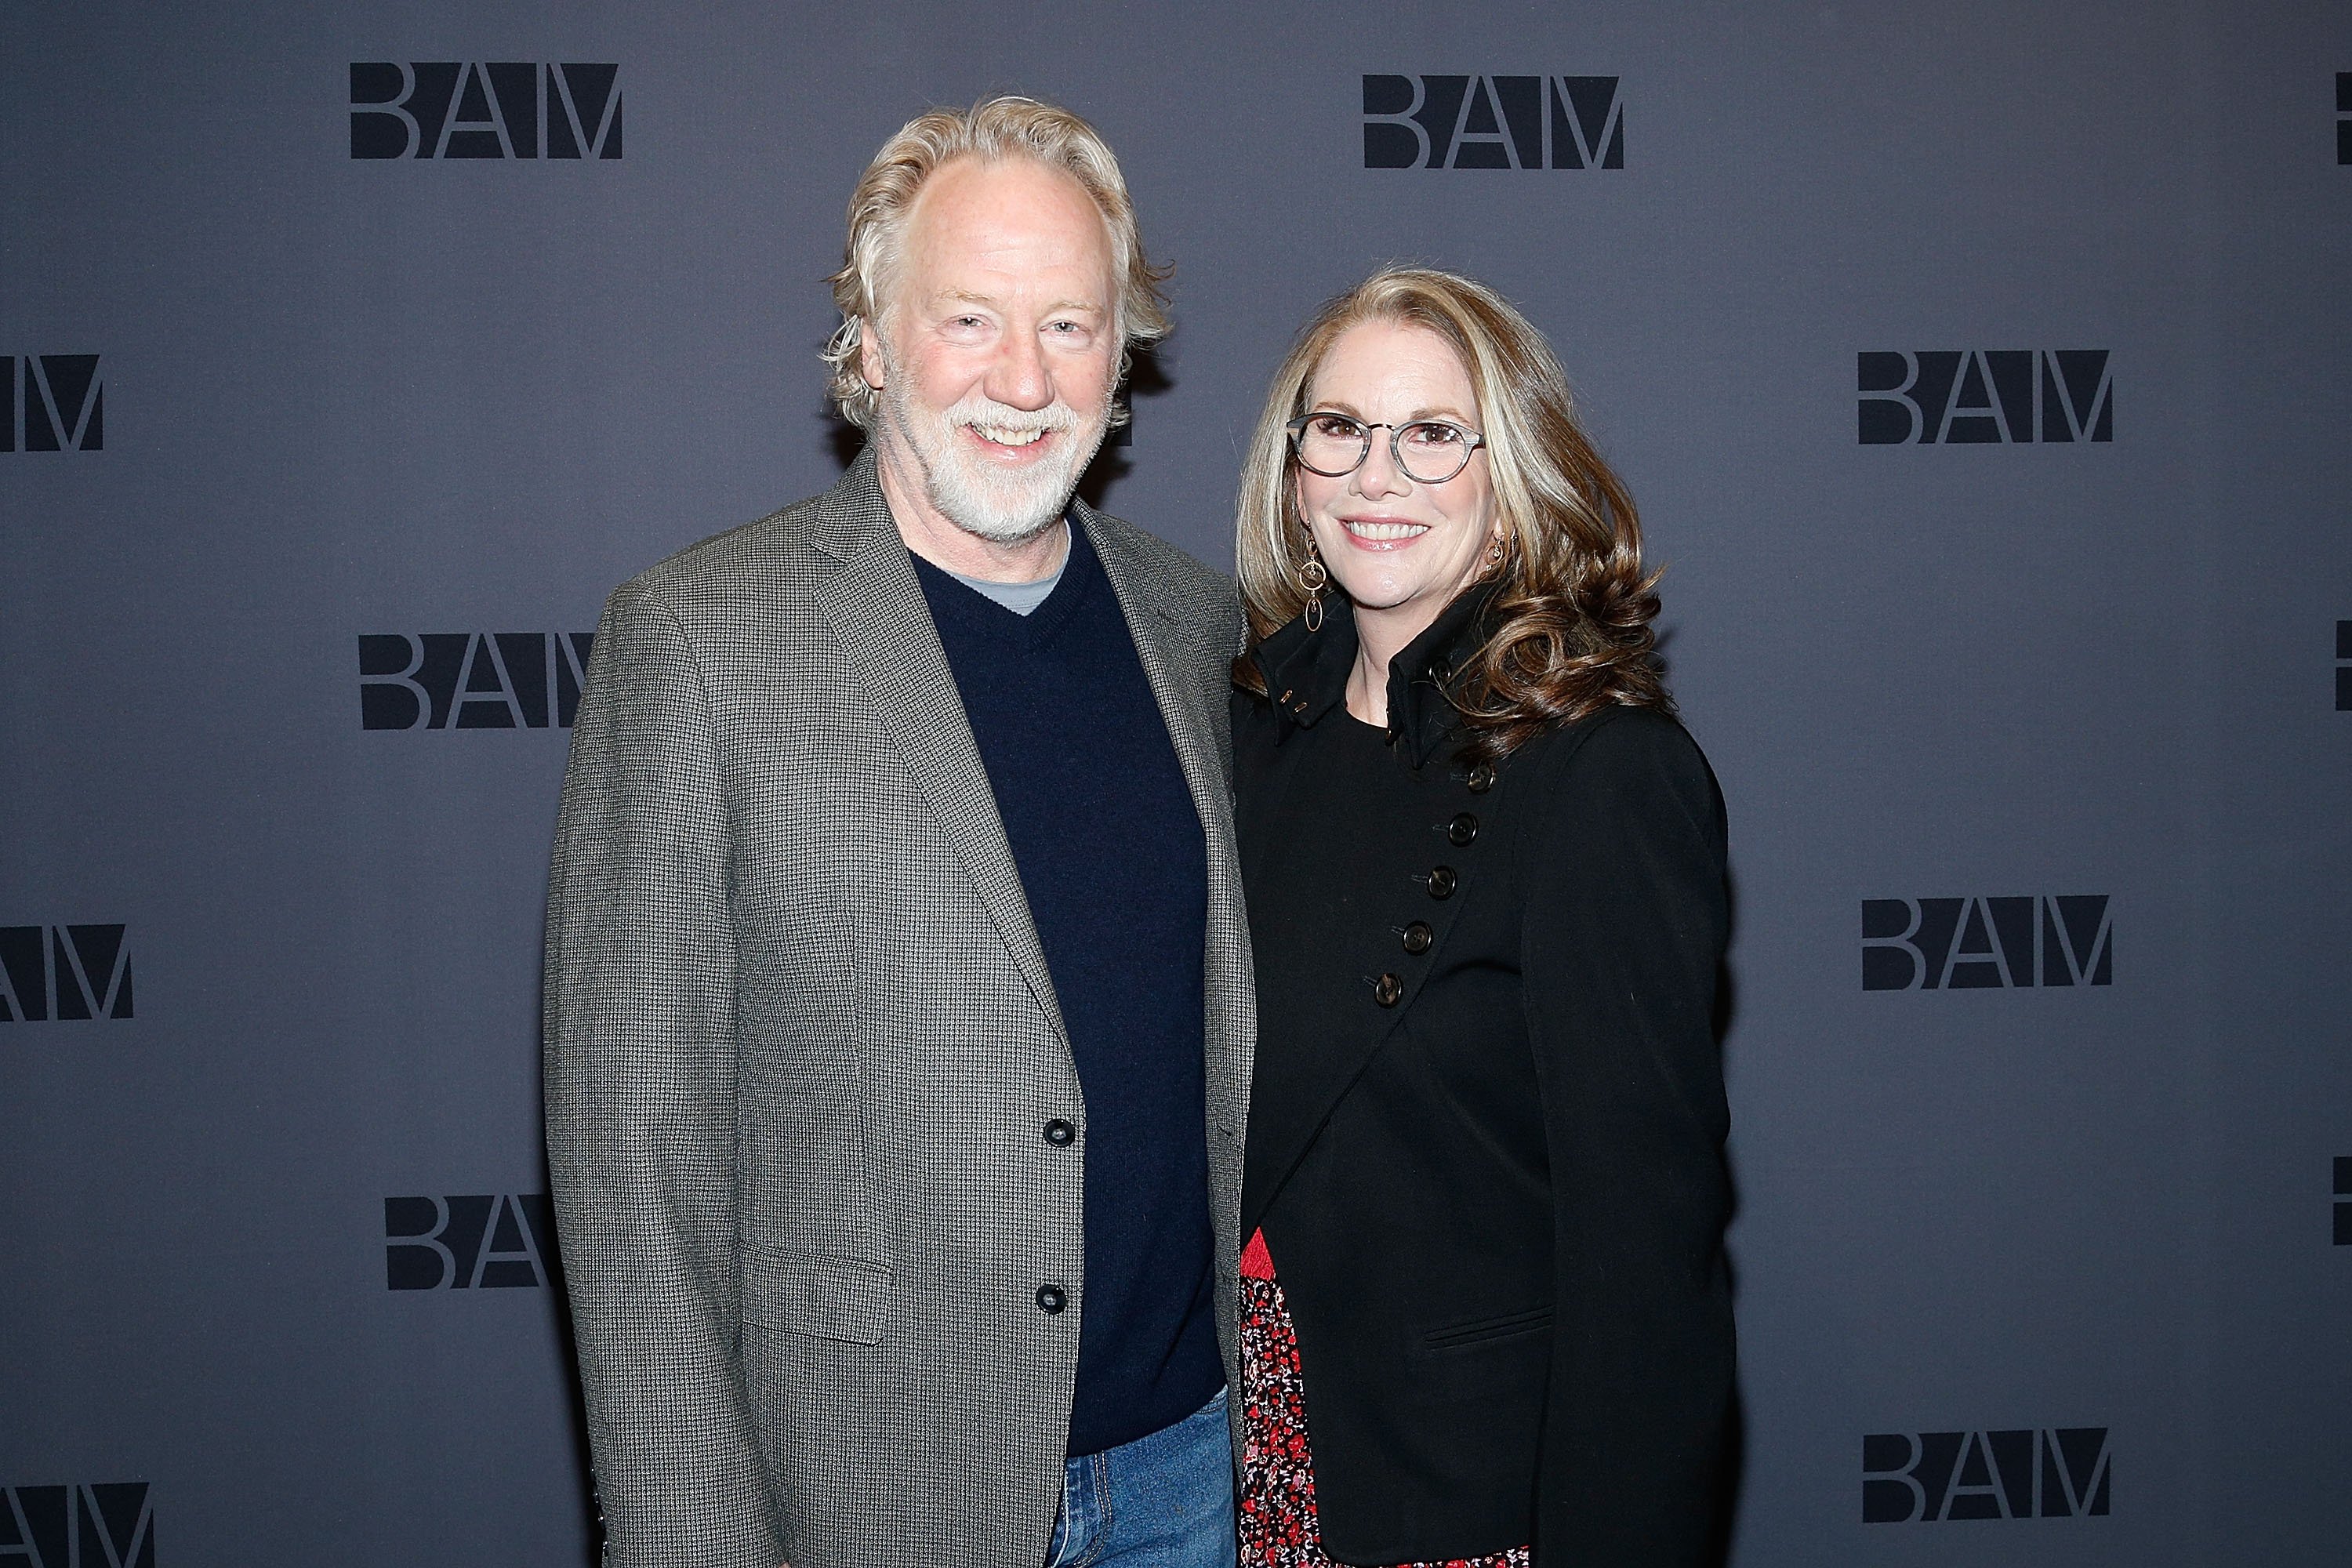 Timothy Busfield and his wife Melissa Gilbert during the opening night party for "Medea" at the BAM Harvey Theater on January 30, 2020 in New York City. | Source: Getty Images